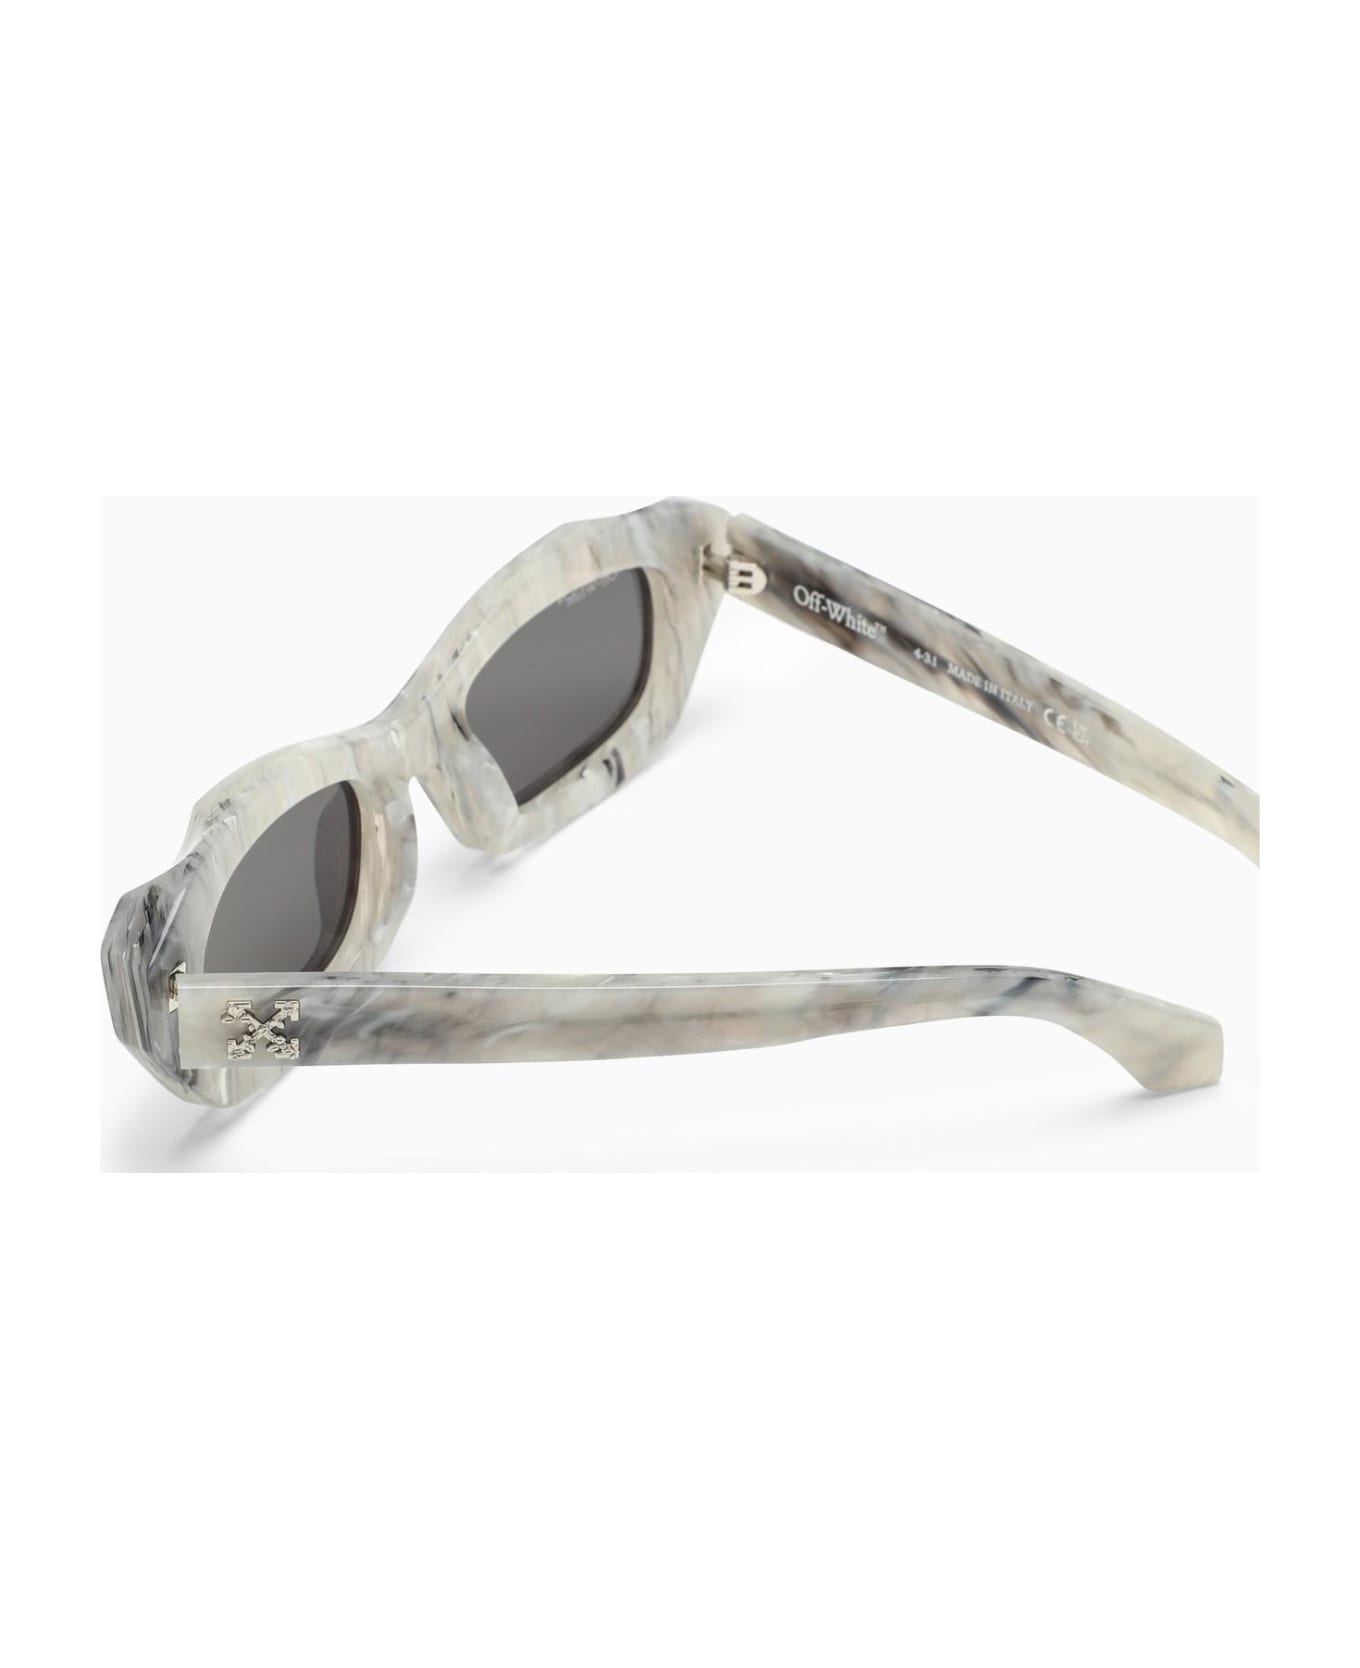 Off-White Sunglasses - Marble